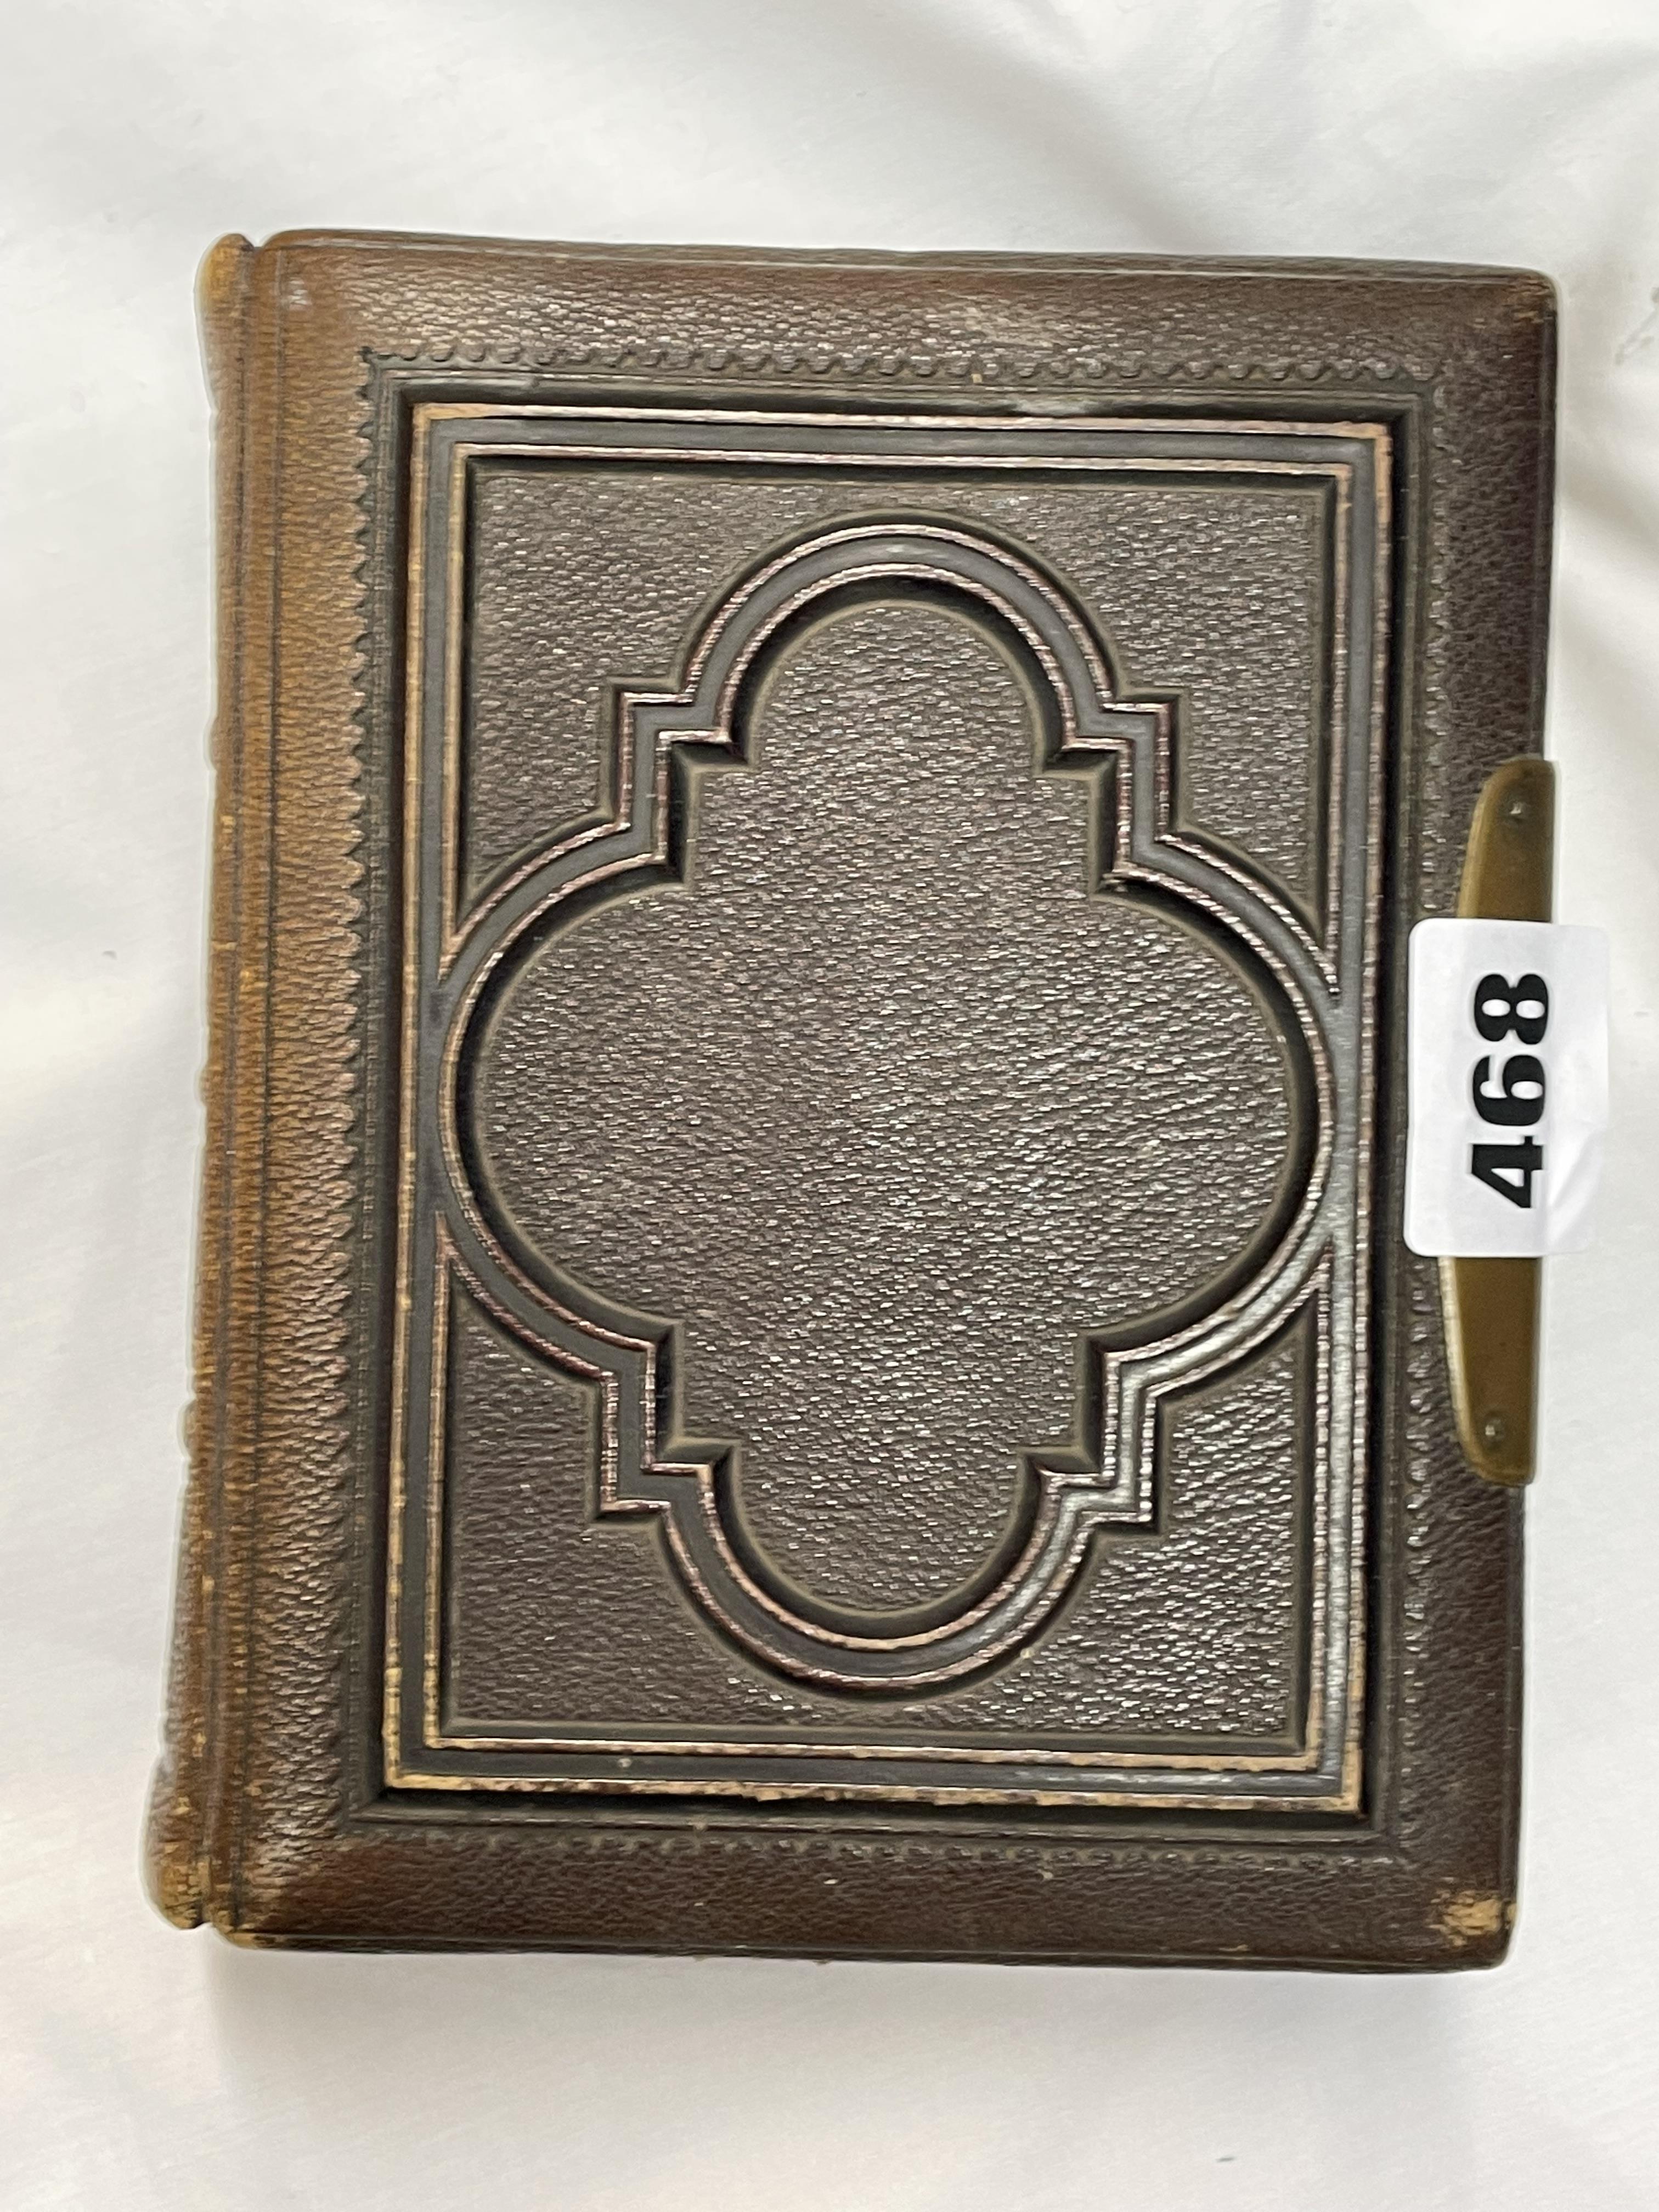 LEATHER BOUND GILT EDGED PHOTO ALBUM CONTAINING BLACK AND WHITE PHOTOS (CLASP A/F) - Image 5 of 5